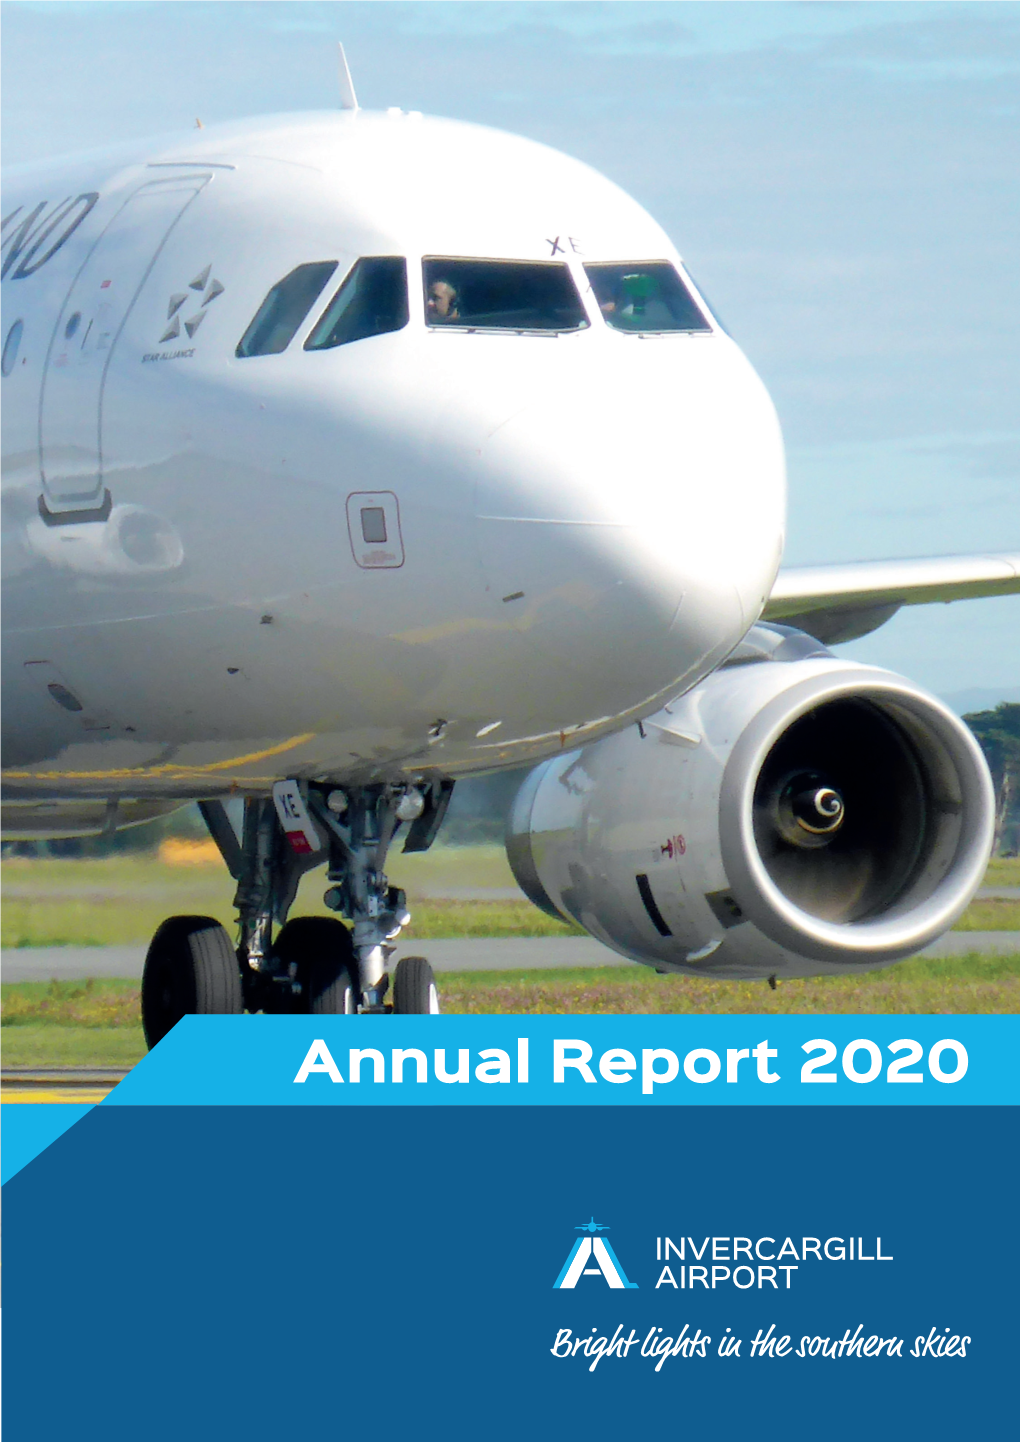 Annual Report 2020 2 INVERCARGILL AIRPORT LTD ANNUAL REPORT 2020 Tab L E of Approval Contents by Directors